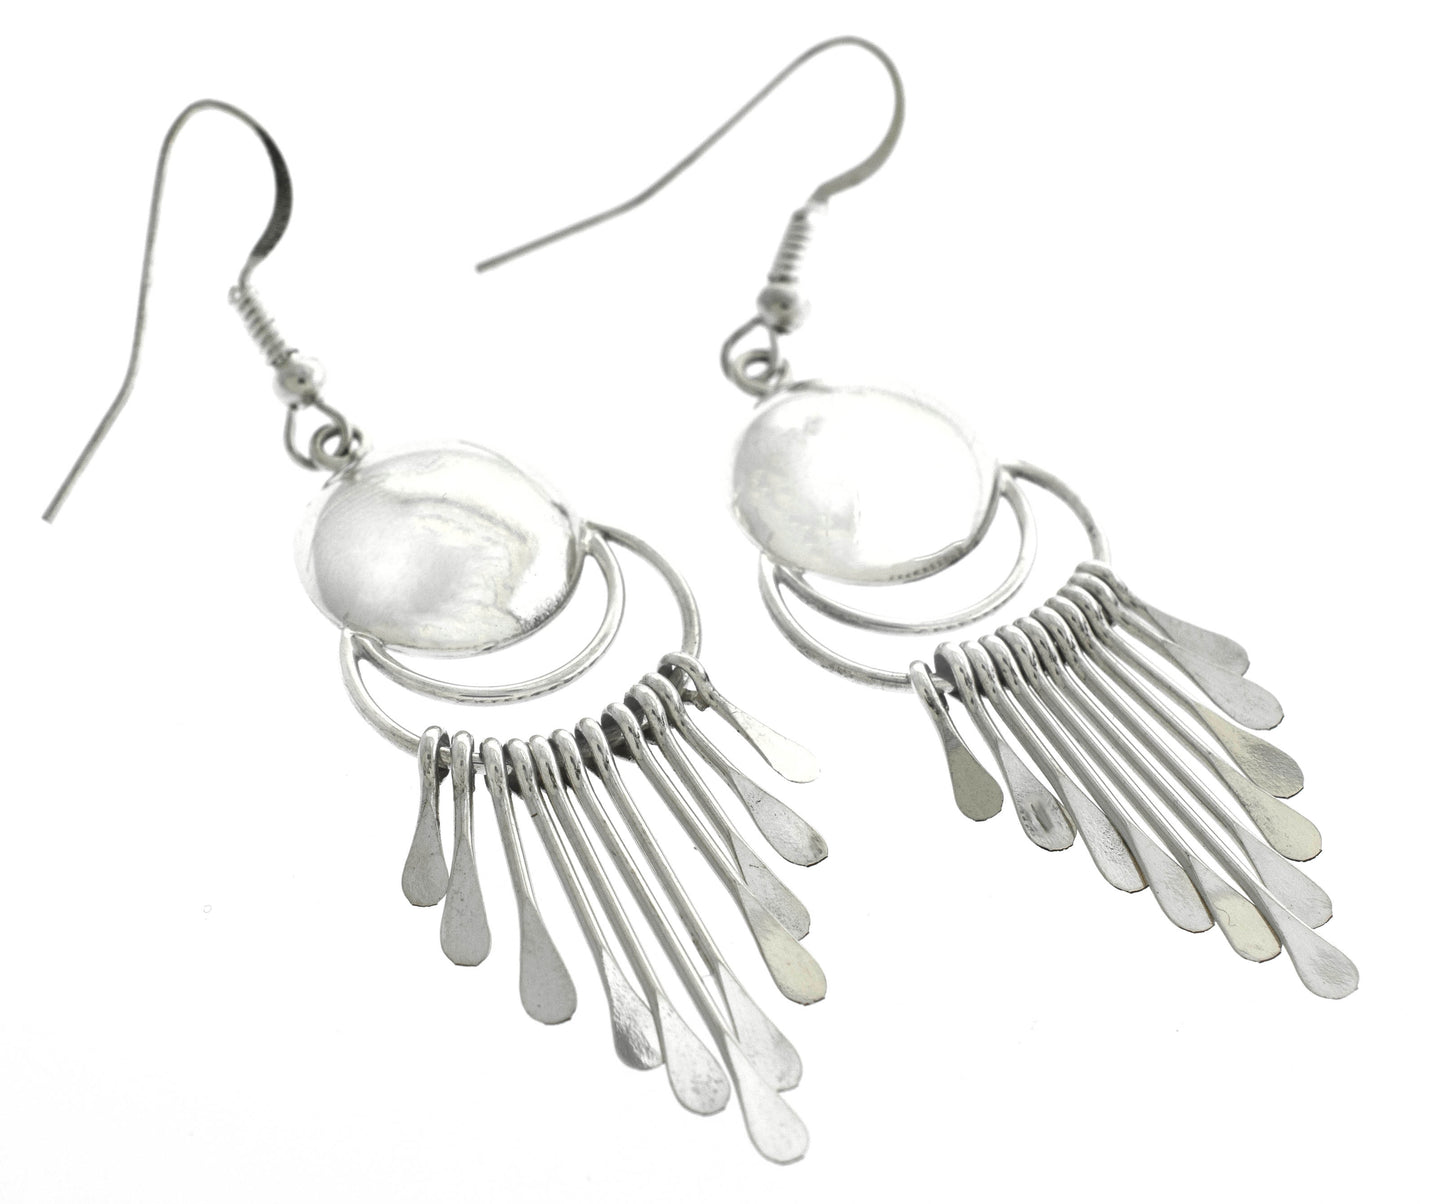 Authentic Super Silver Native American Navajo Chandelier earrings, crafted with sterling silver and adorned with a white mother of pearl.